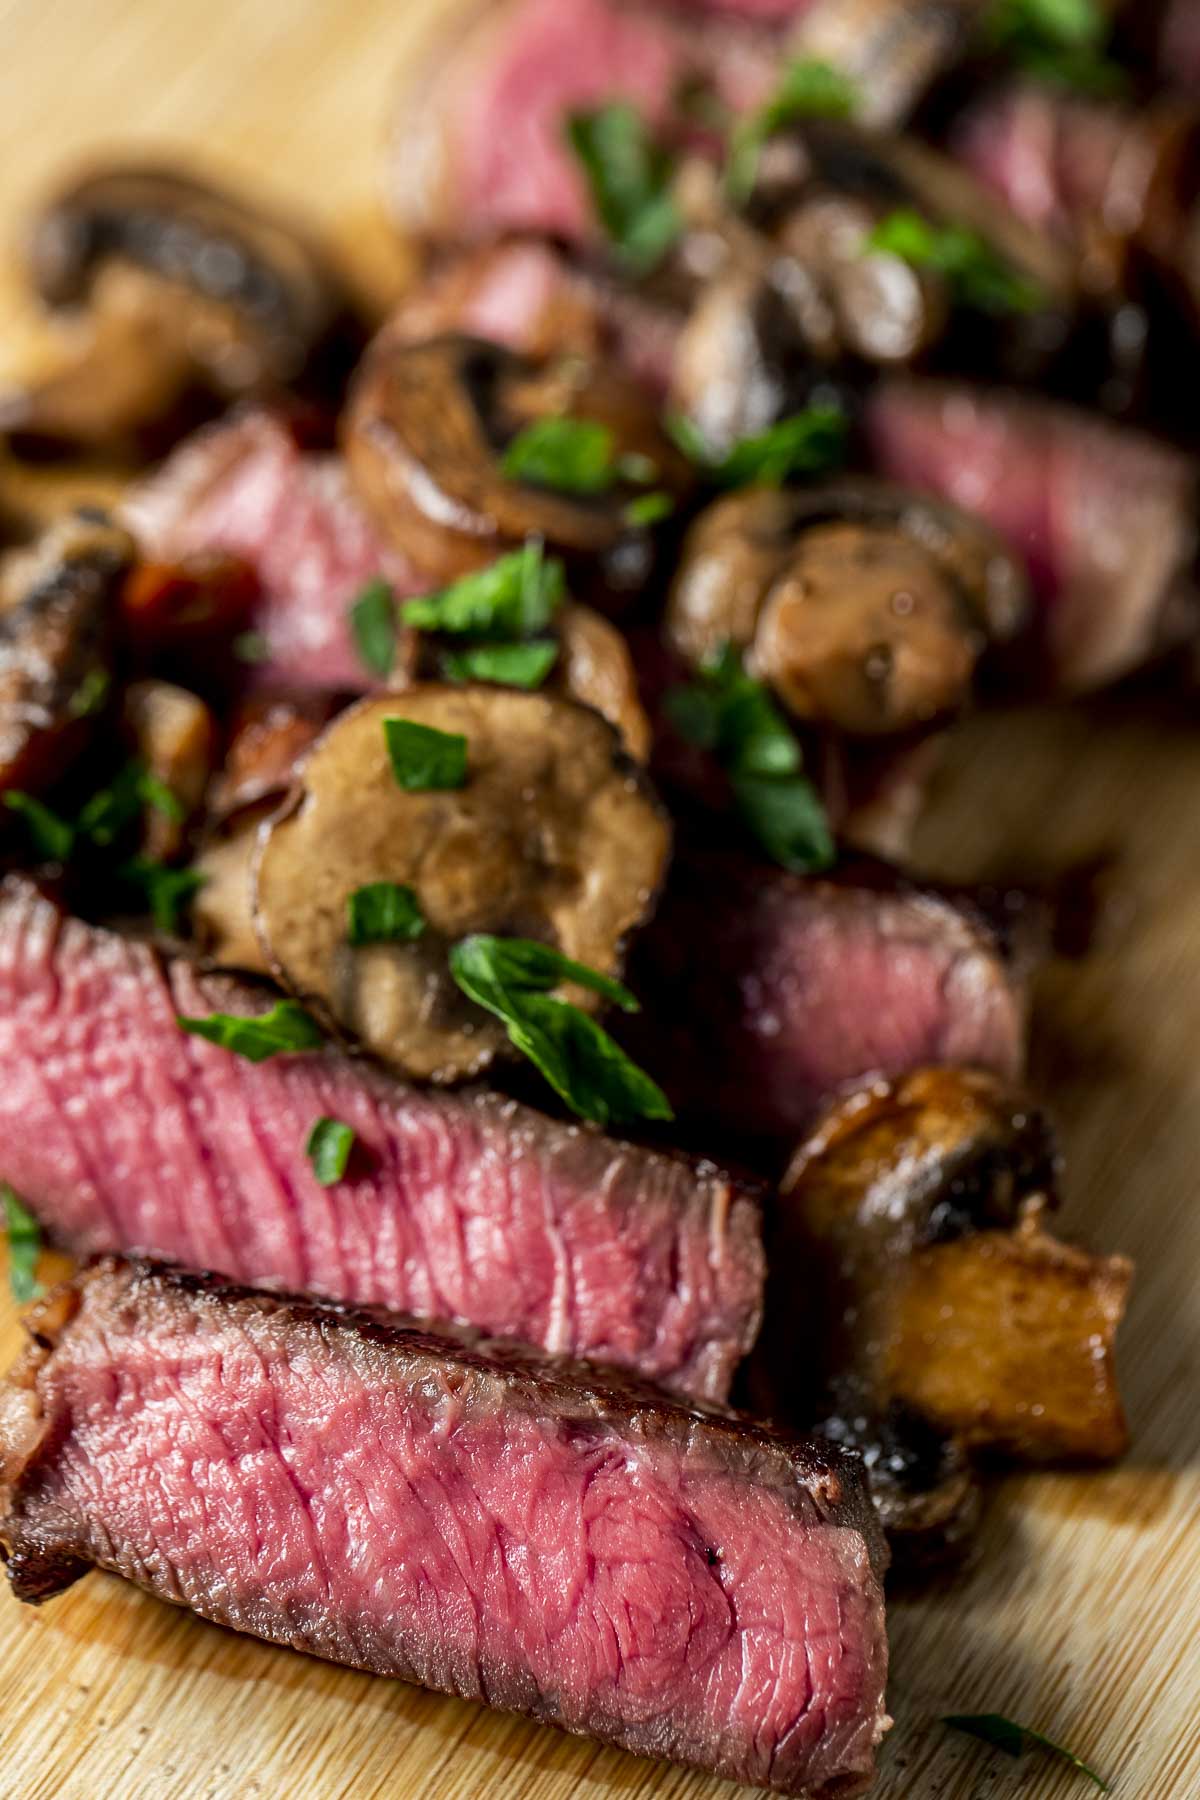 Sirloin steak slices topped with mushrooms and chopped herbs.